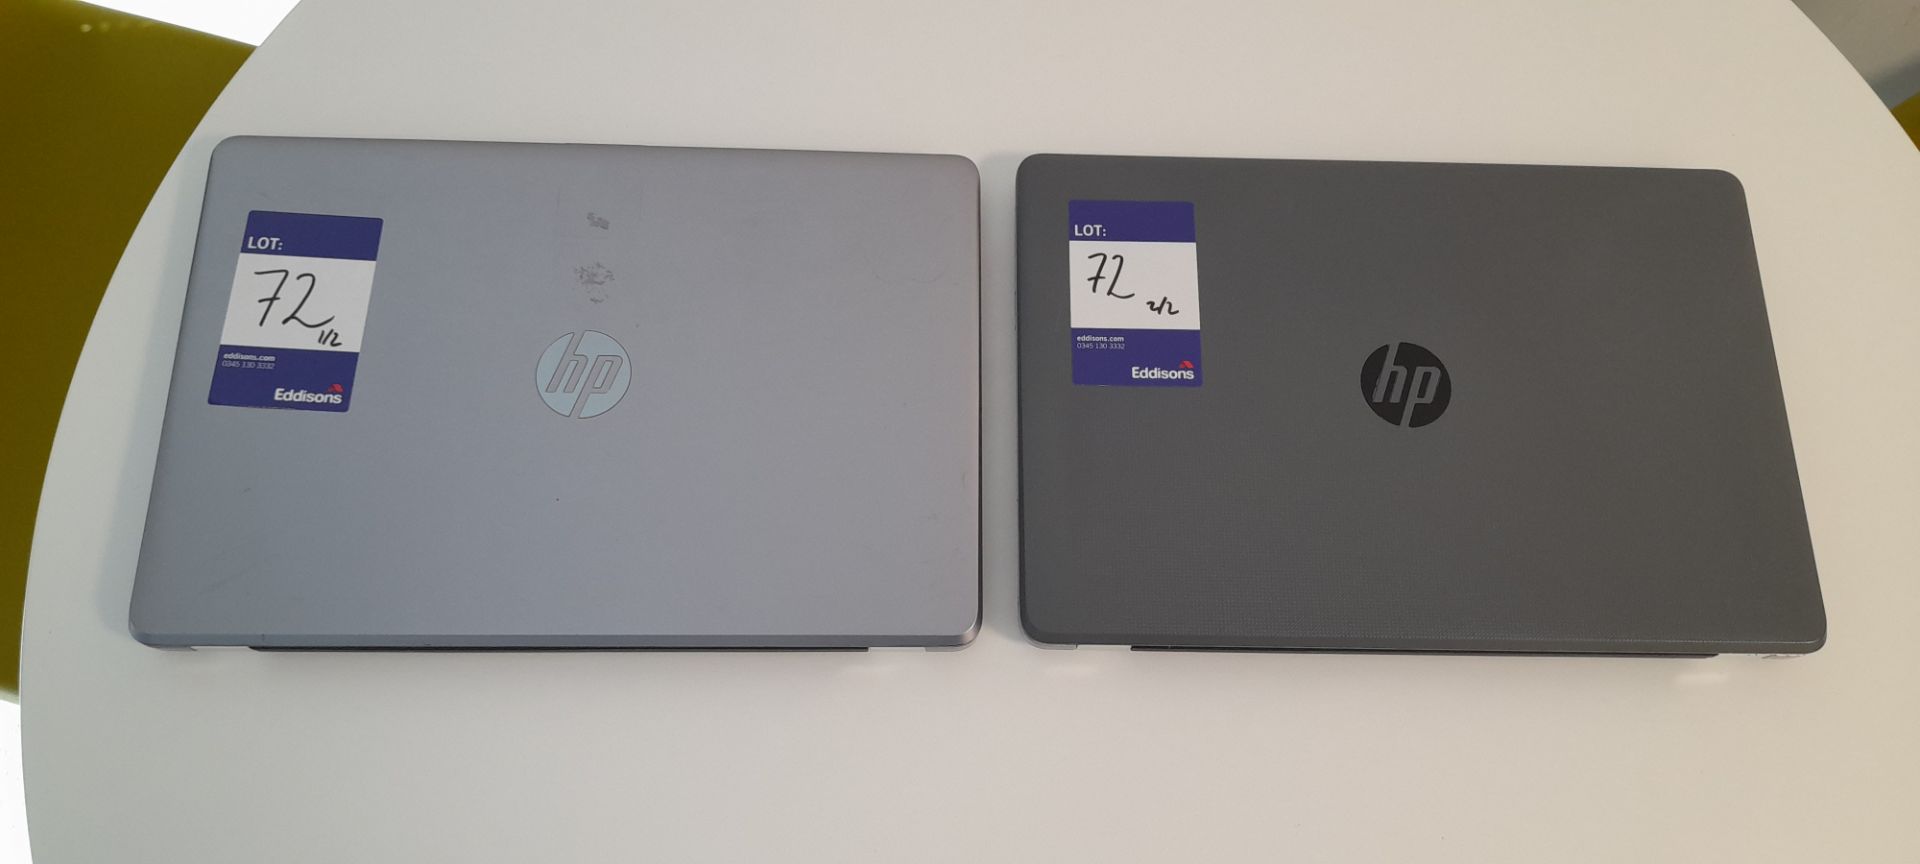 2x HP 3168NGW laptop with intel core i7, 7th Gen. Collection from Canary Wharf, London, E14